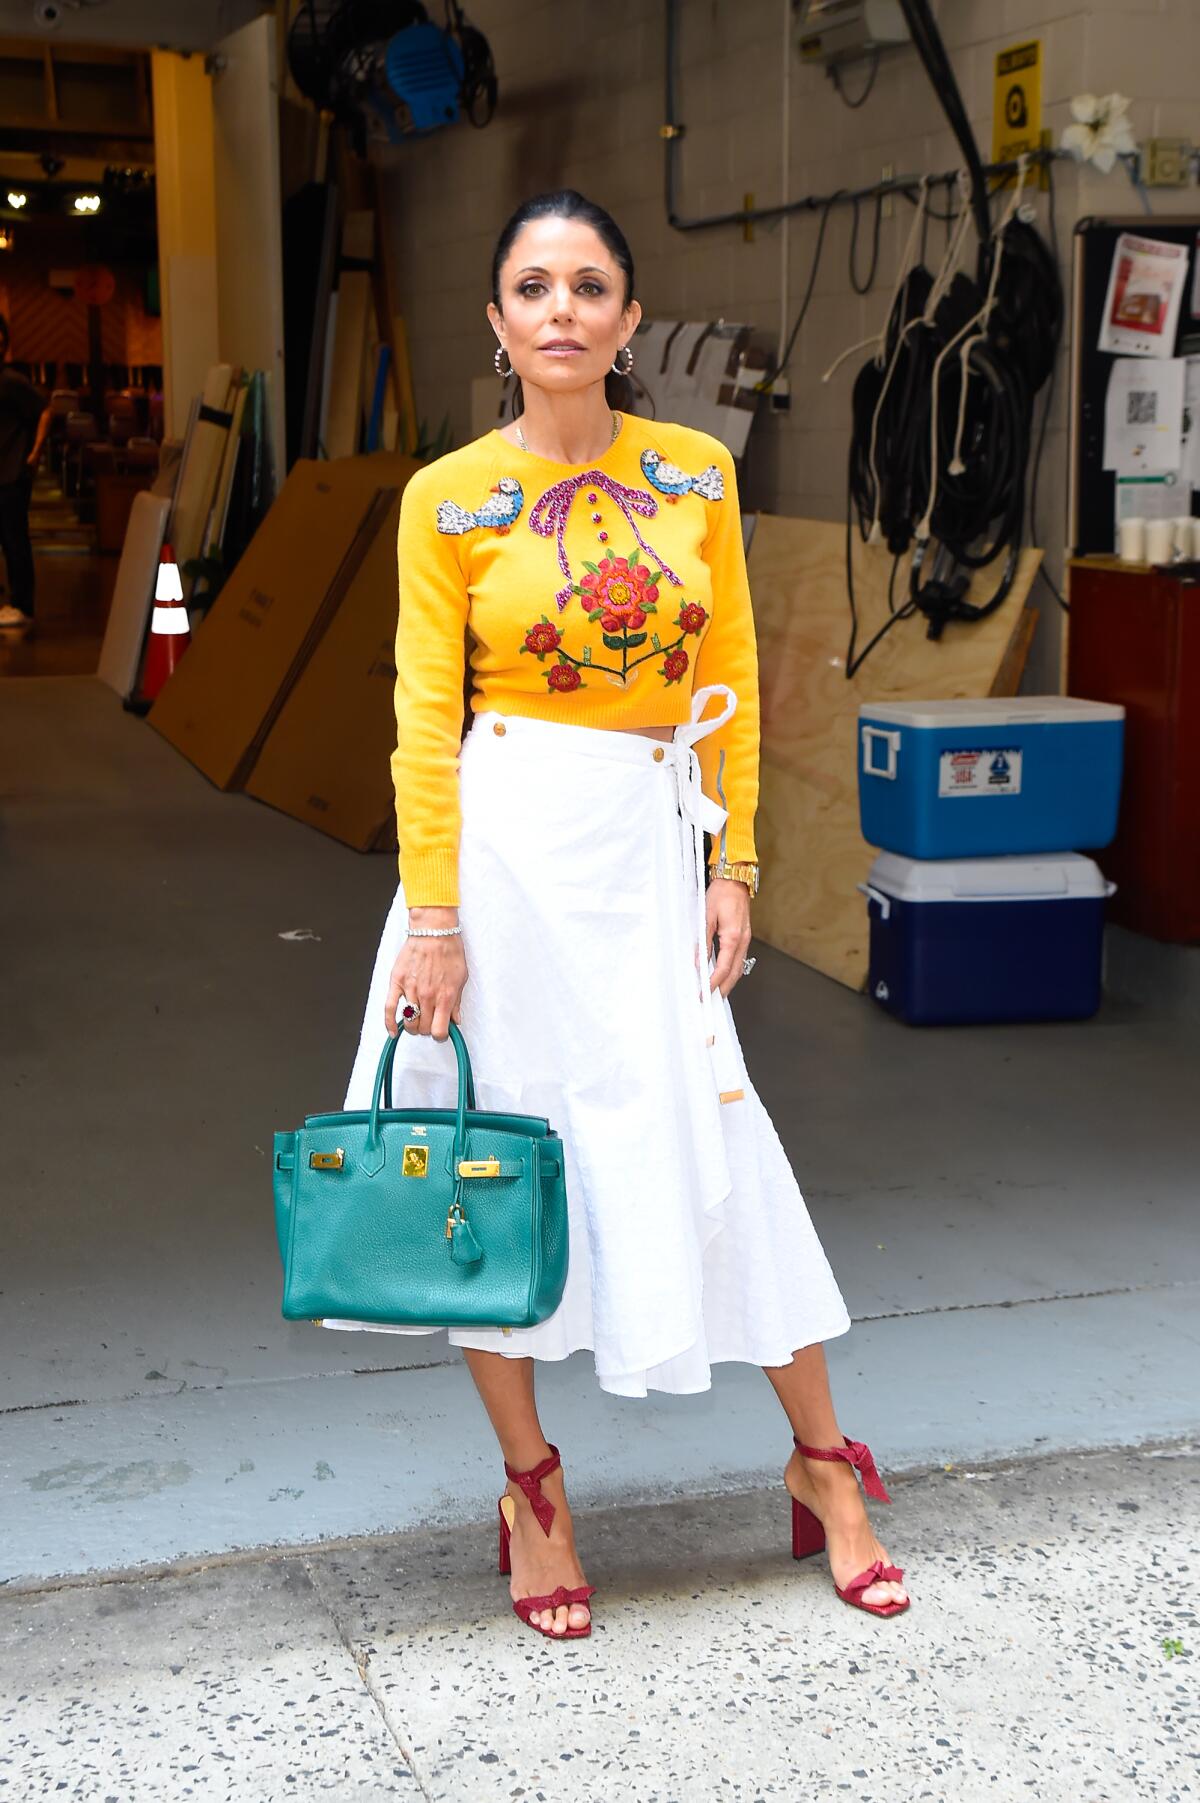 Bethenny Frankel holds a teal handbag and is wearing a yellow sweater and long white skirt.